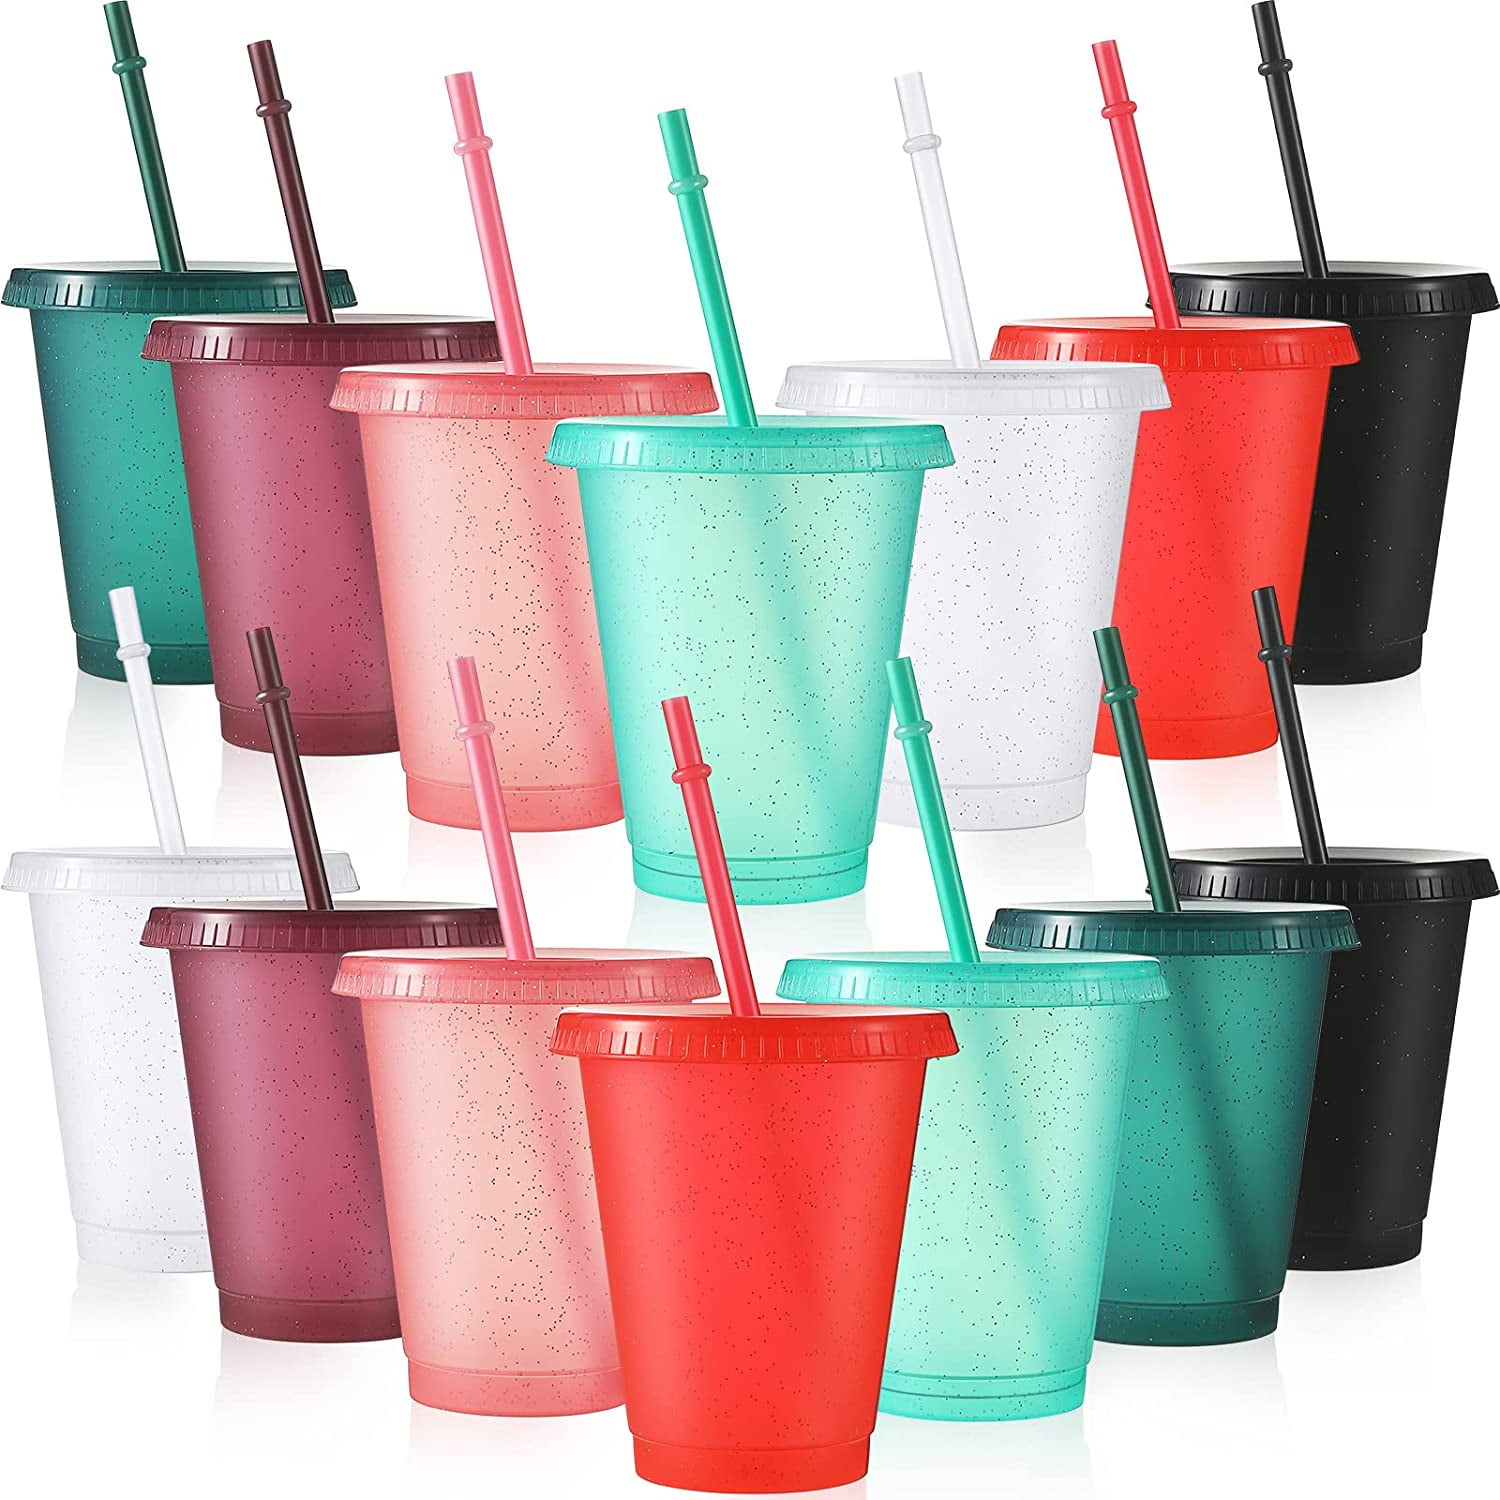 Twsoul 500ml/650ml Insulated Double Wall Plastic Tumbler Cup with Lid,Reusable Summer Cold Drink Iced Coffee Cups with Lids and Straws for Adults Kids